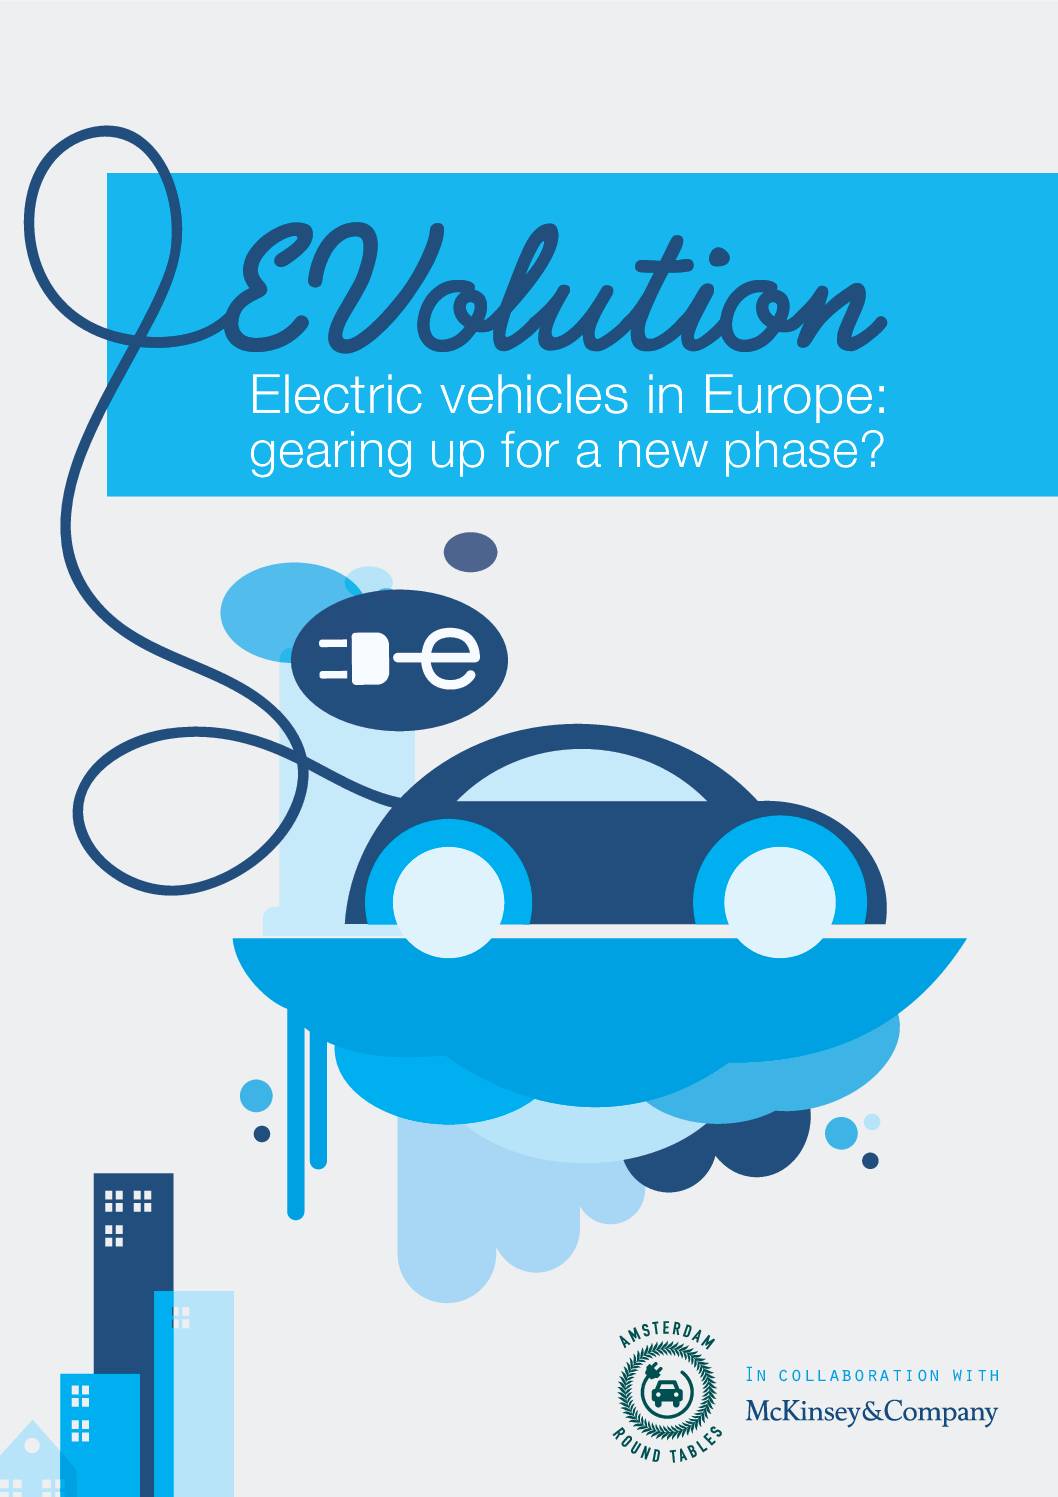 Electric vehicles in Europe: gearing up for a new phase?